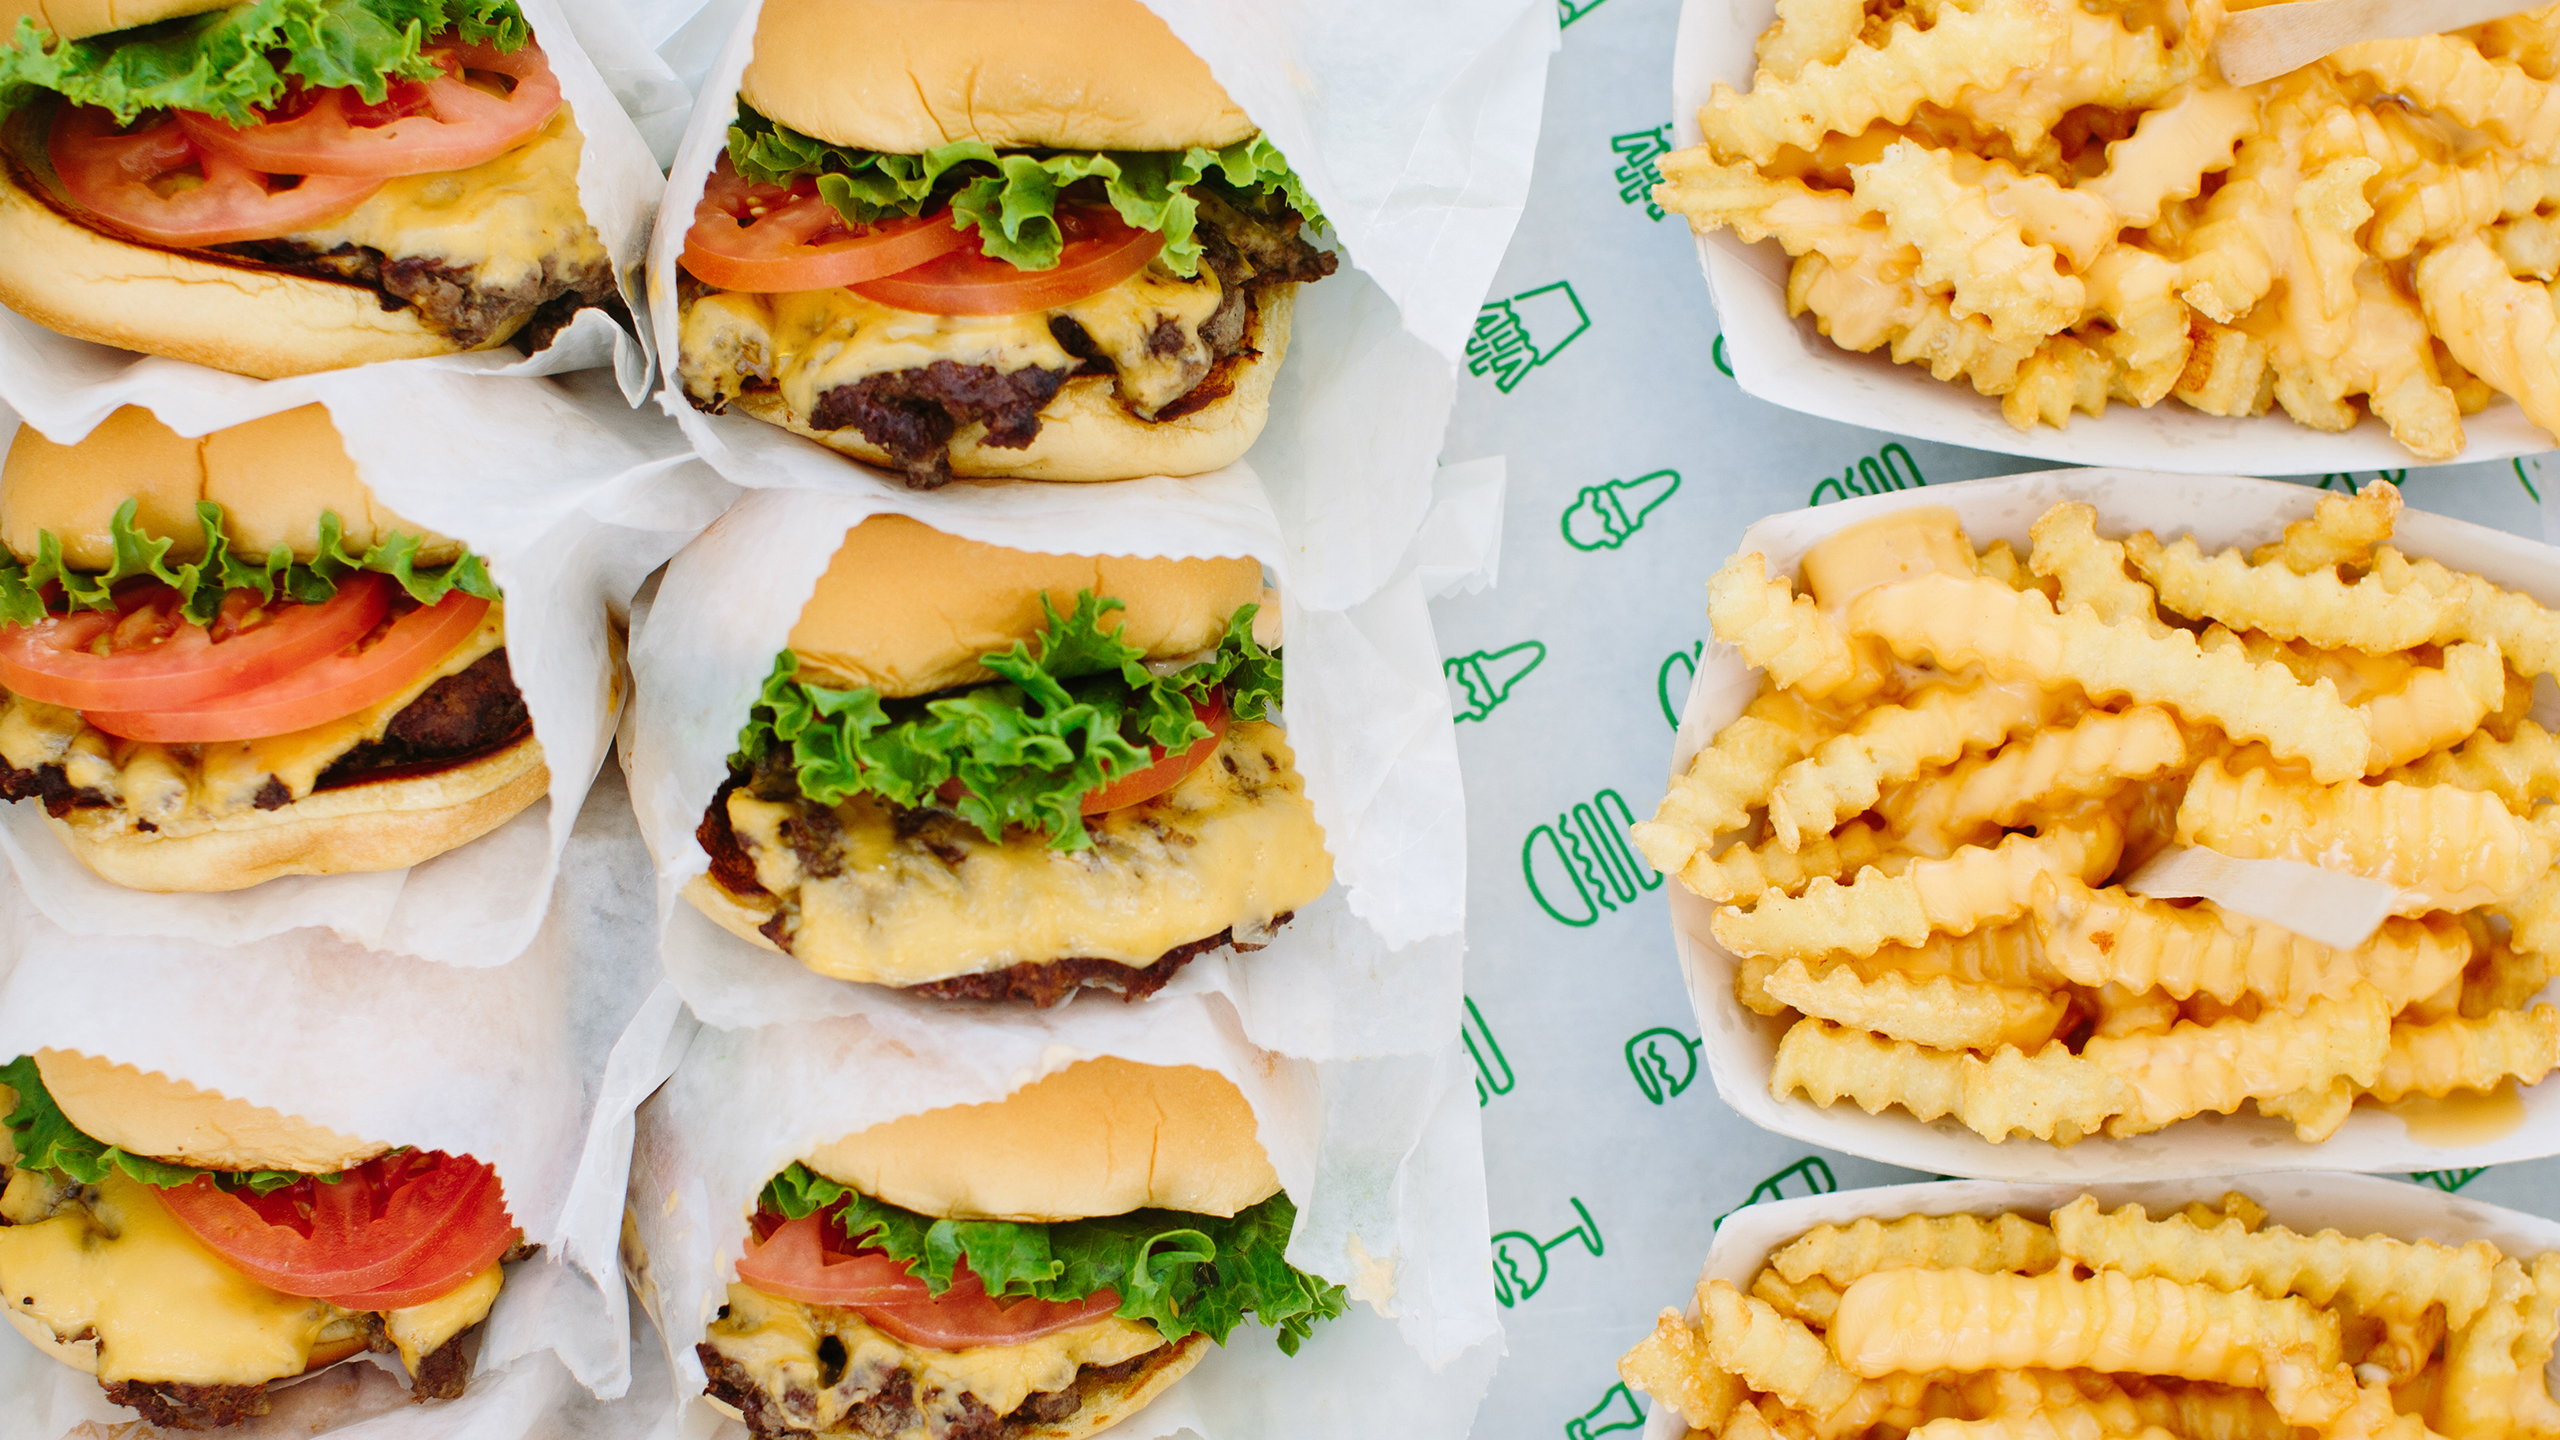 Burgers and fries from Shake Shack